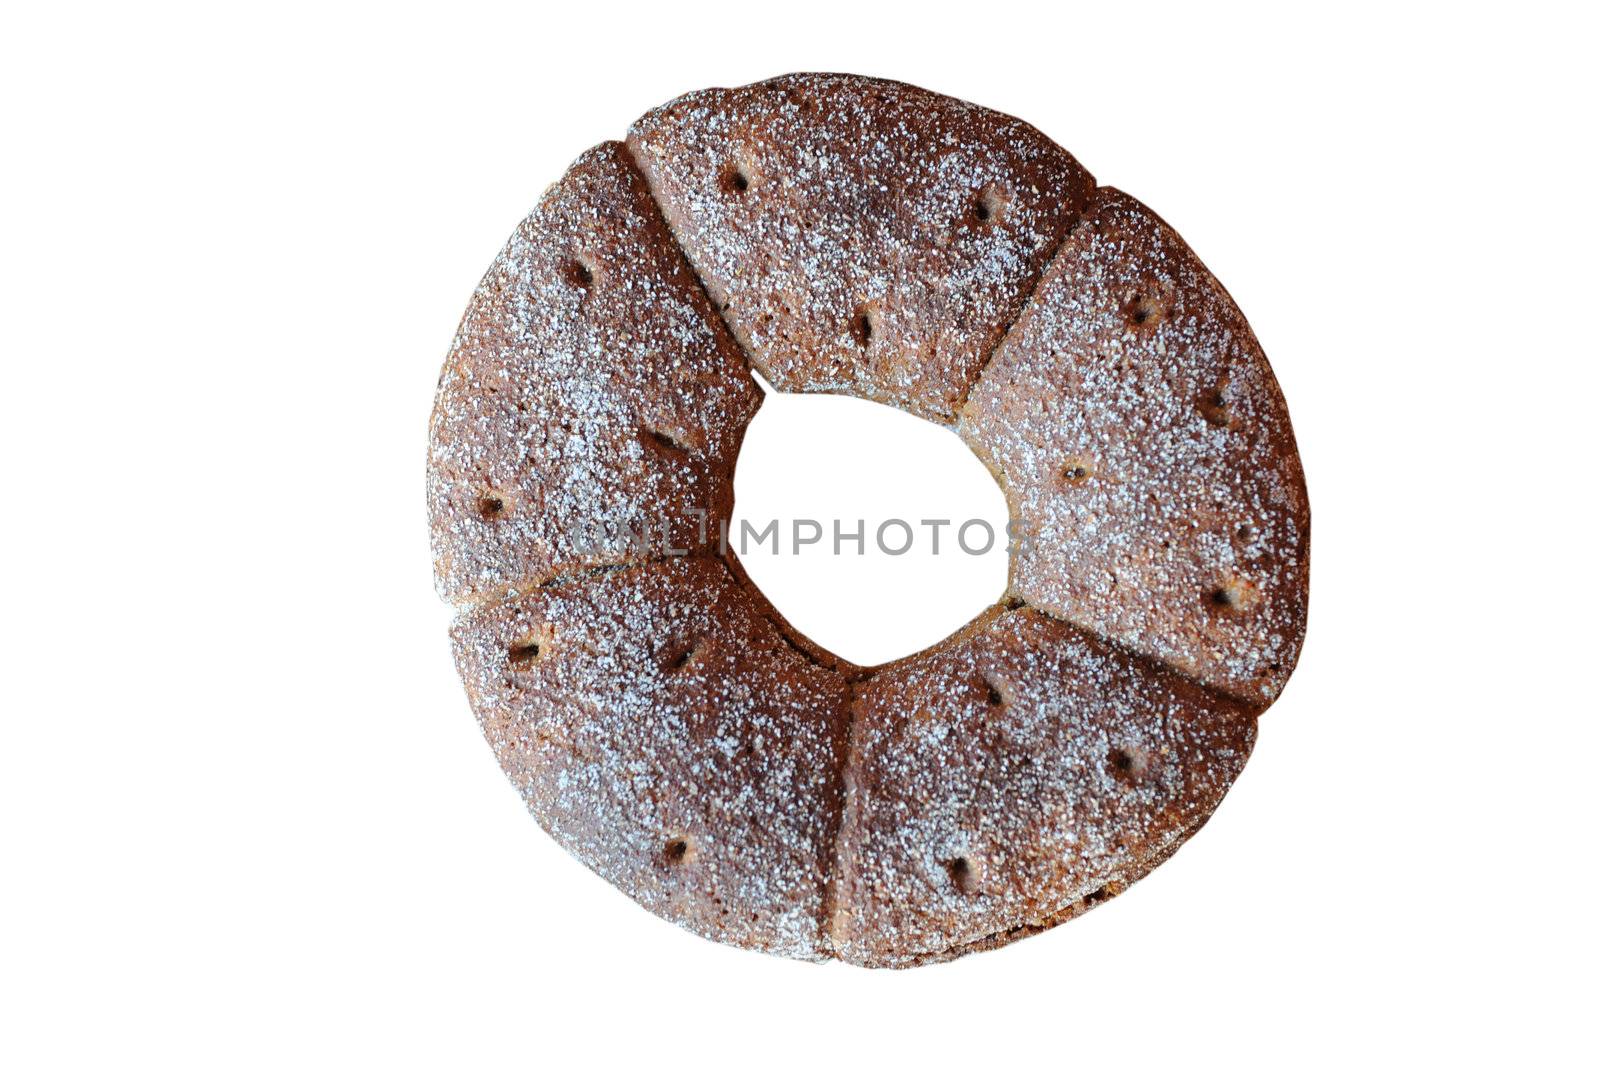 Traditional Scandinavian round bread isolanet on the white